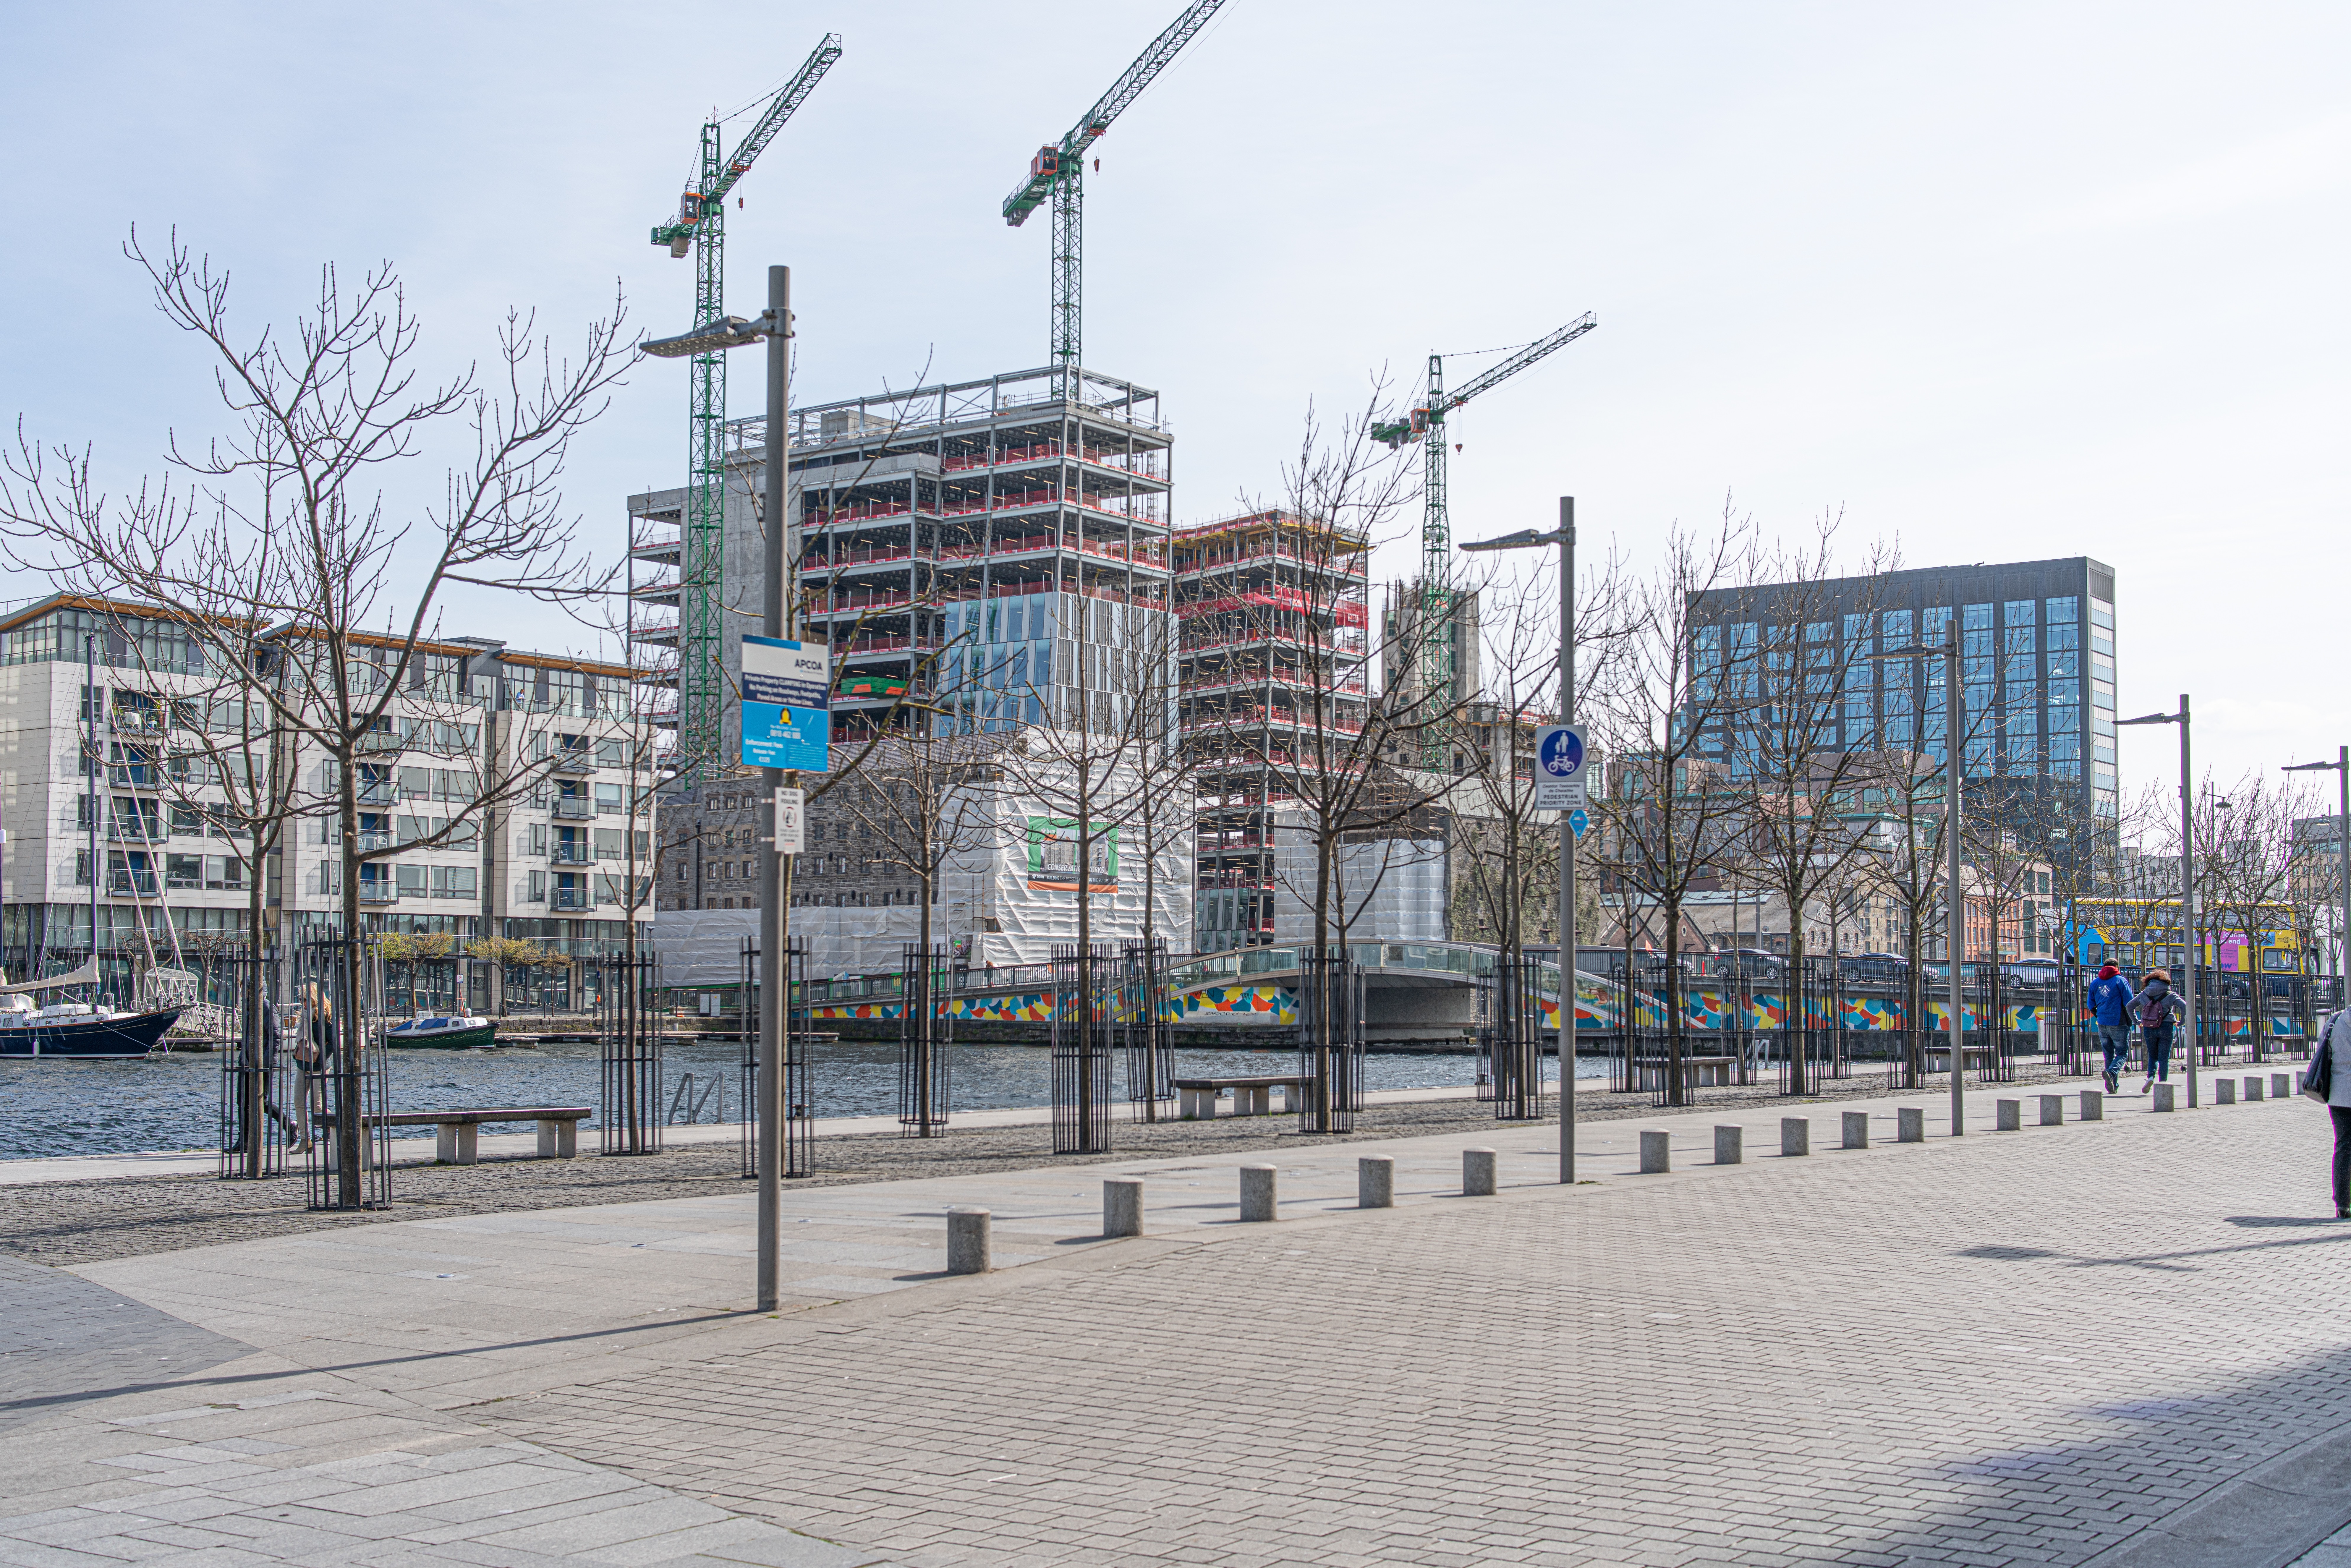  GRAND CANAL SQUARE 007 